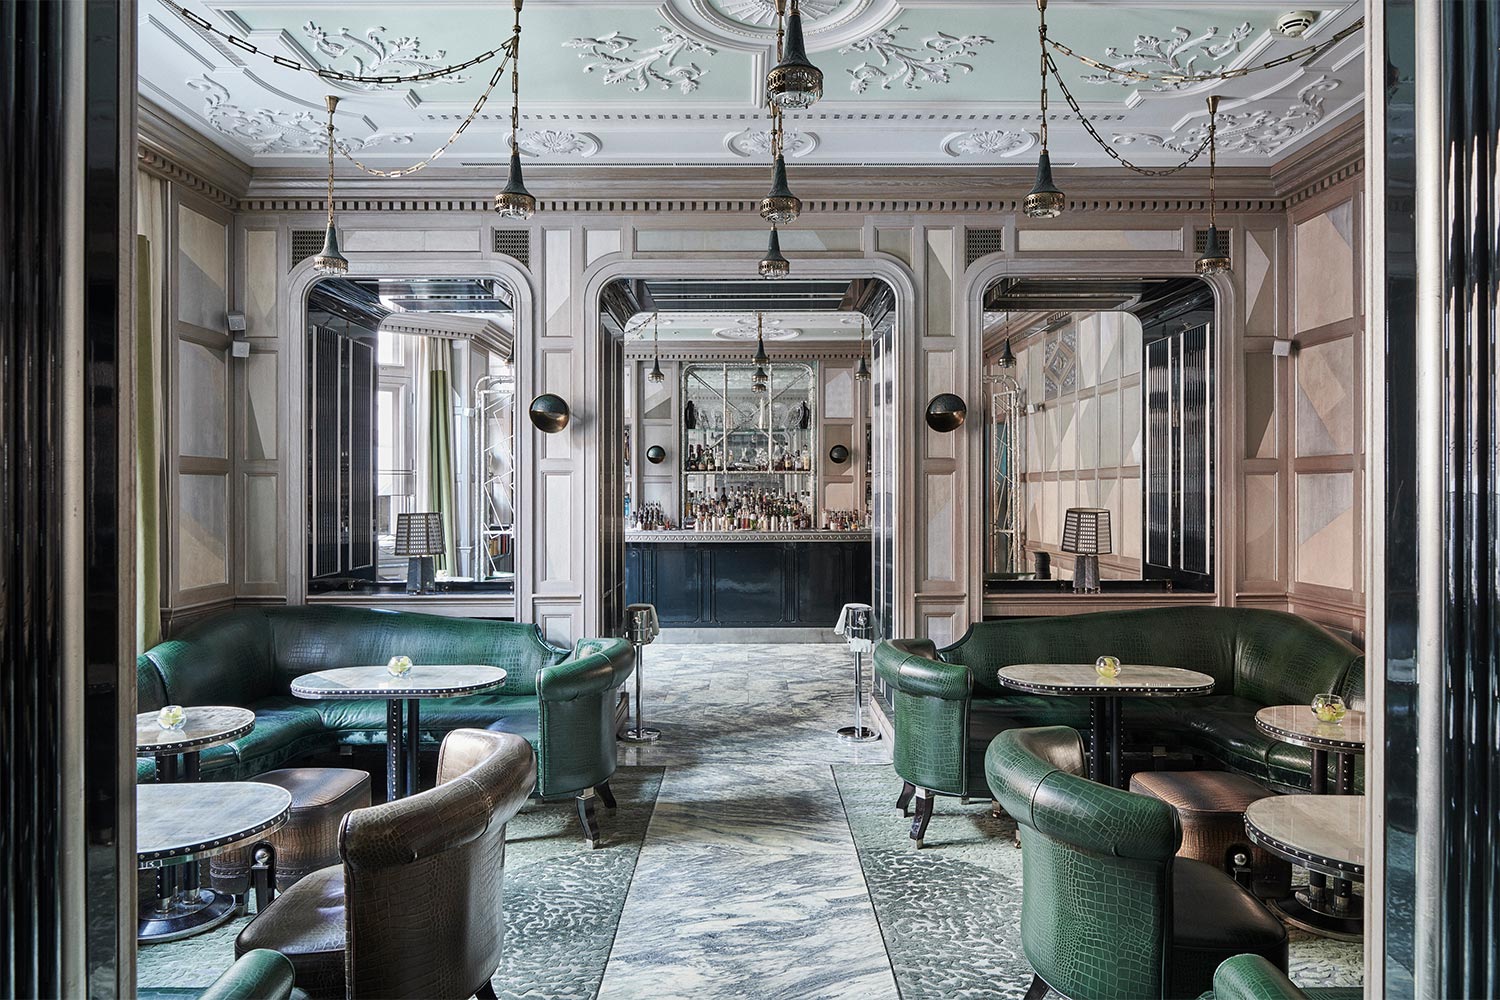 The Connaught Bar, a legendary cocktail bar in London